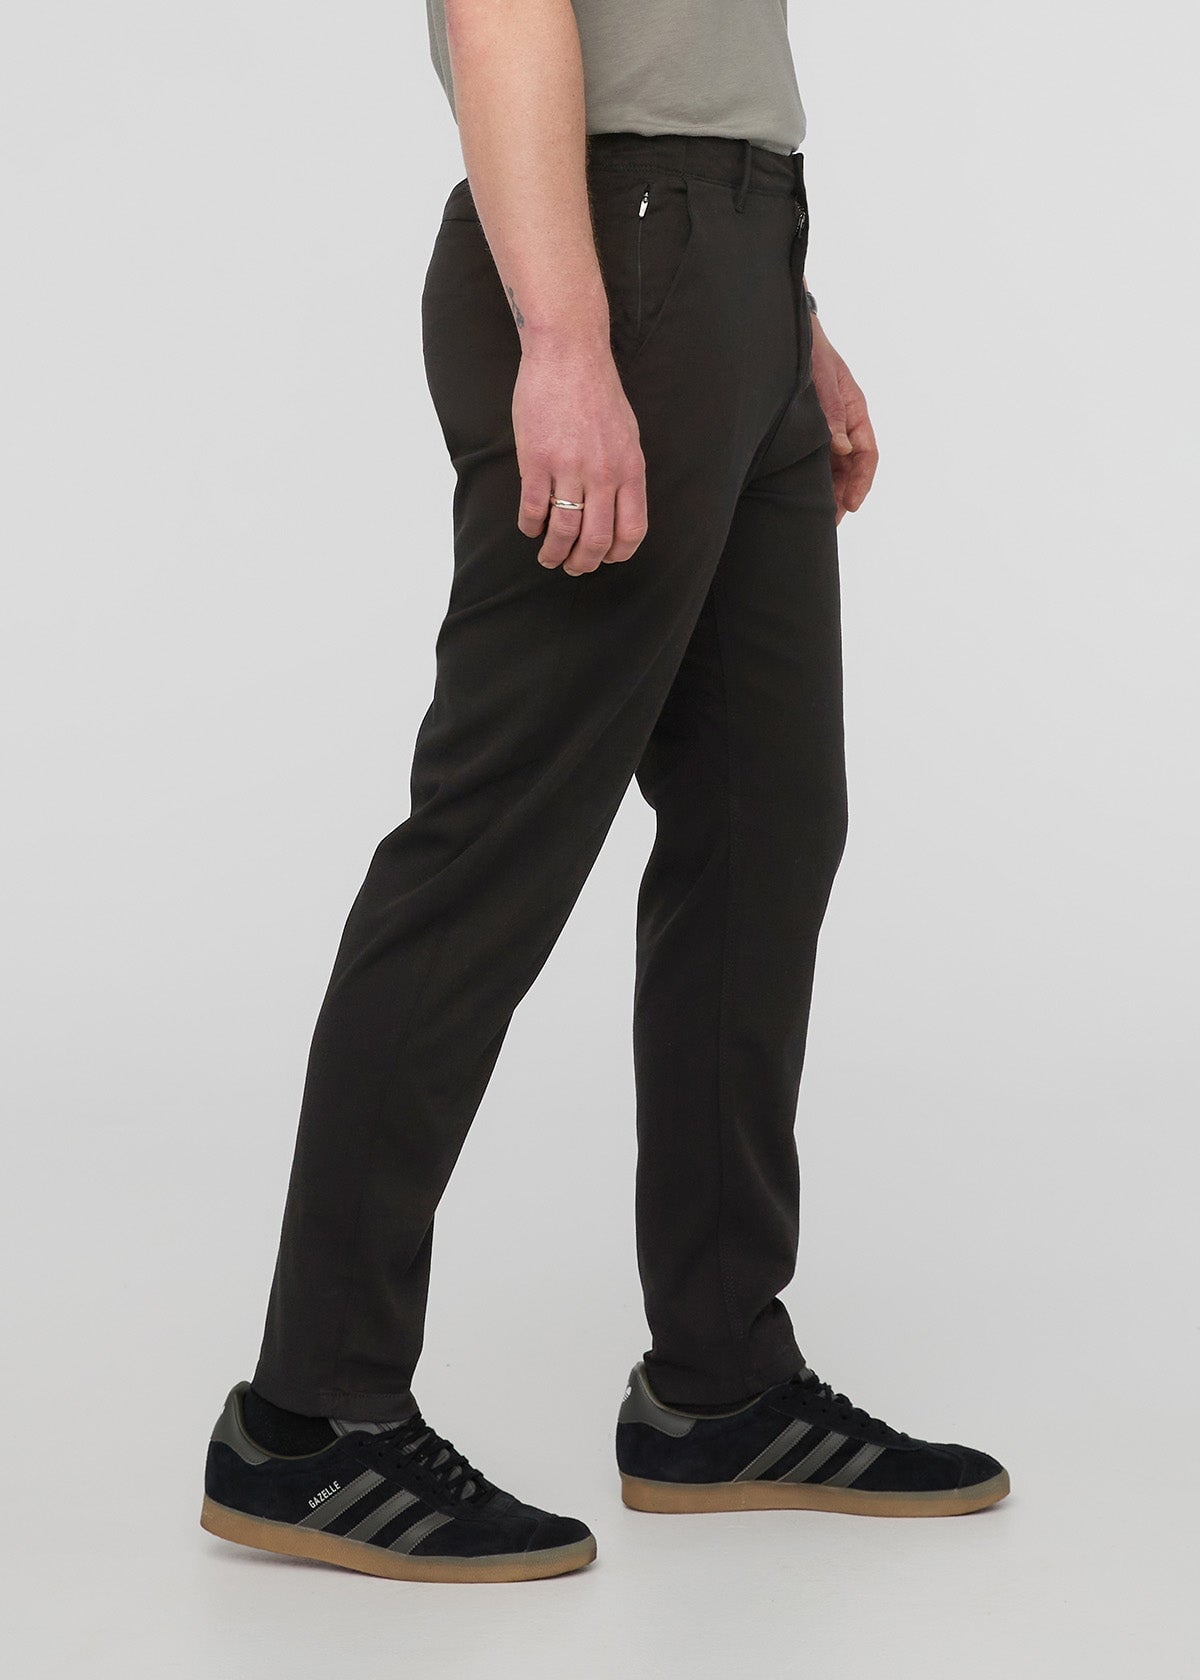 ABC Classic-Fit Trouser 34L *Smooth Twill